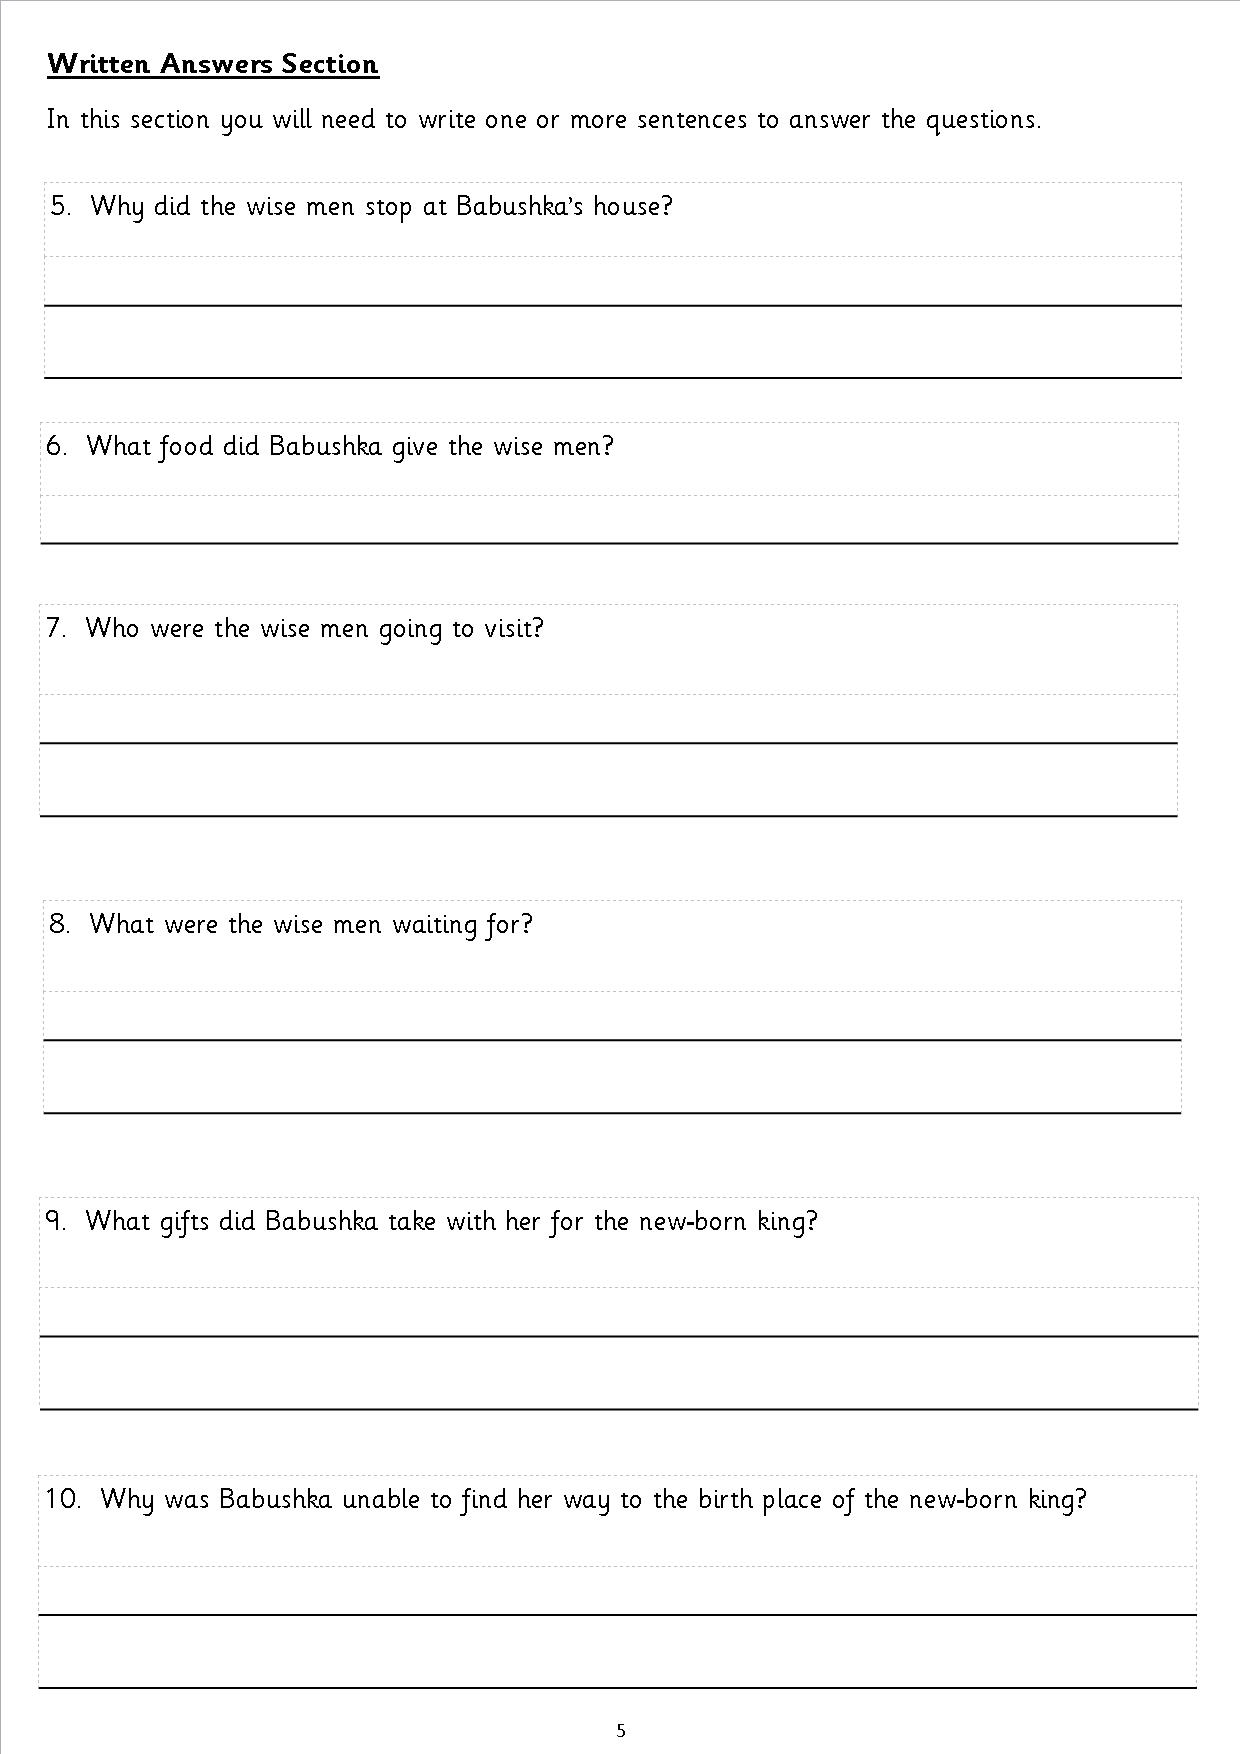 foundation-stage-2-worksheets-photos